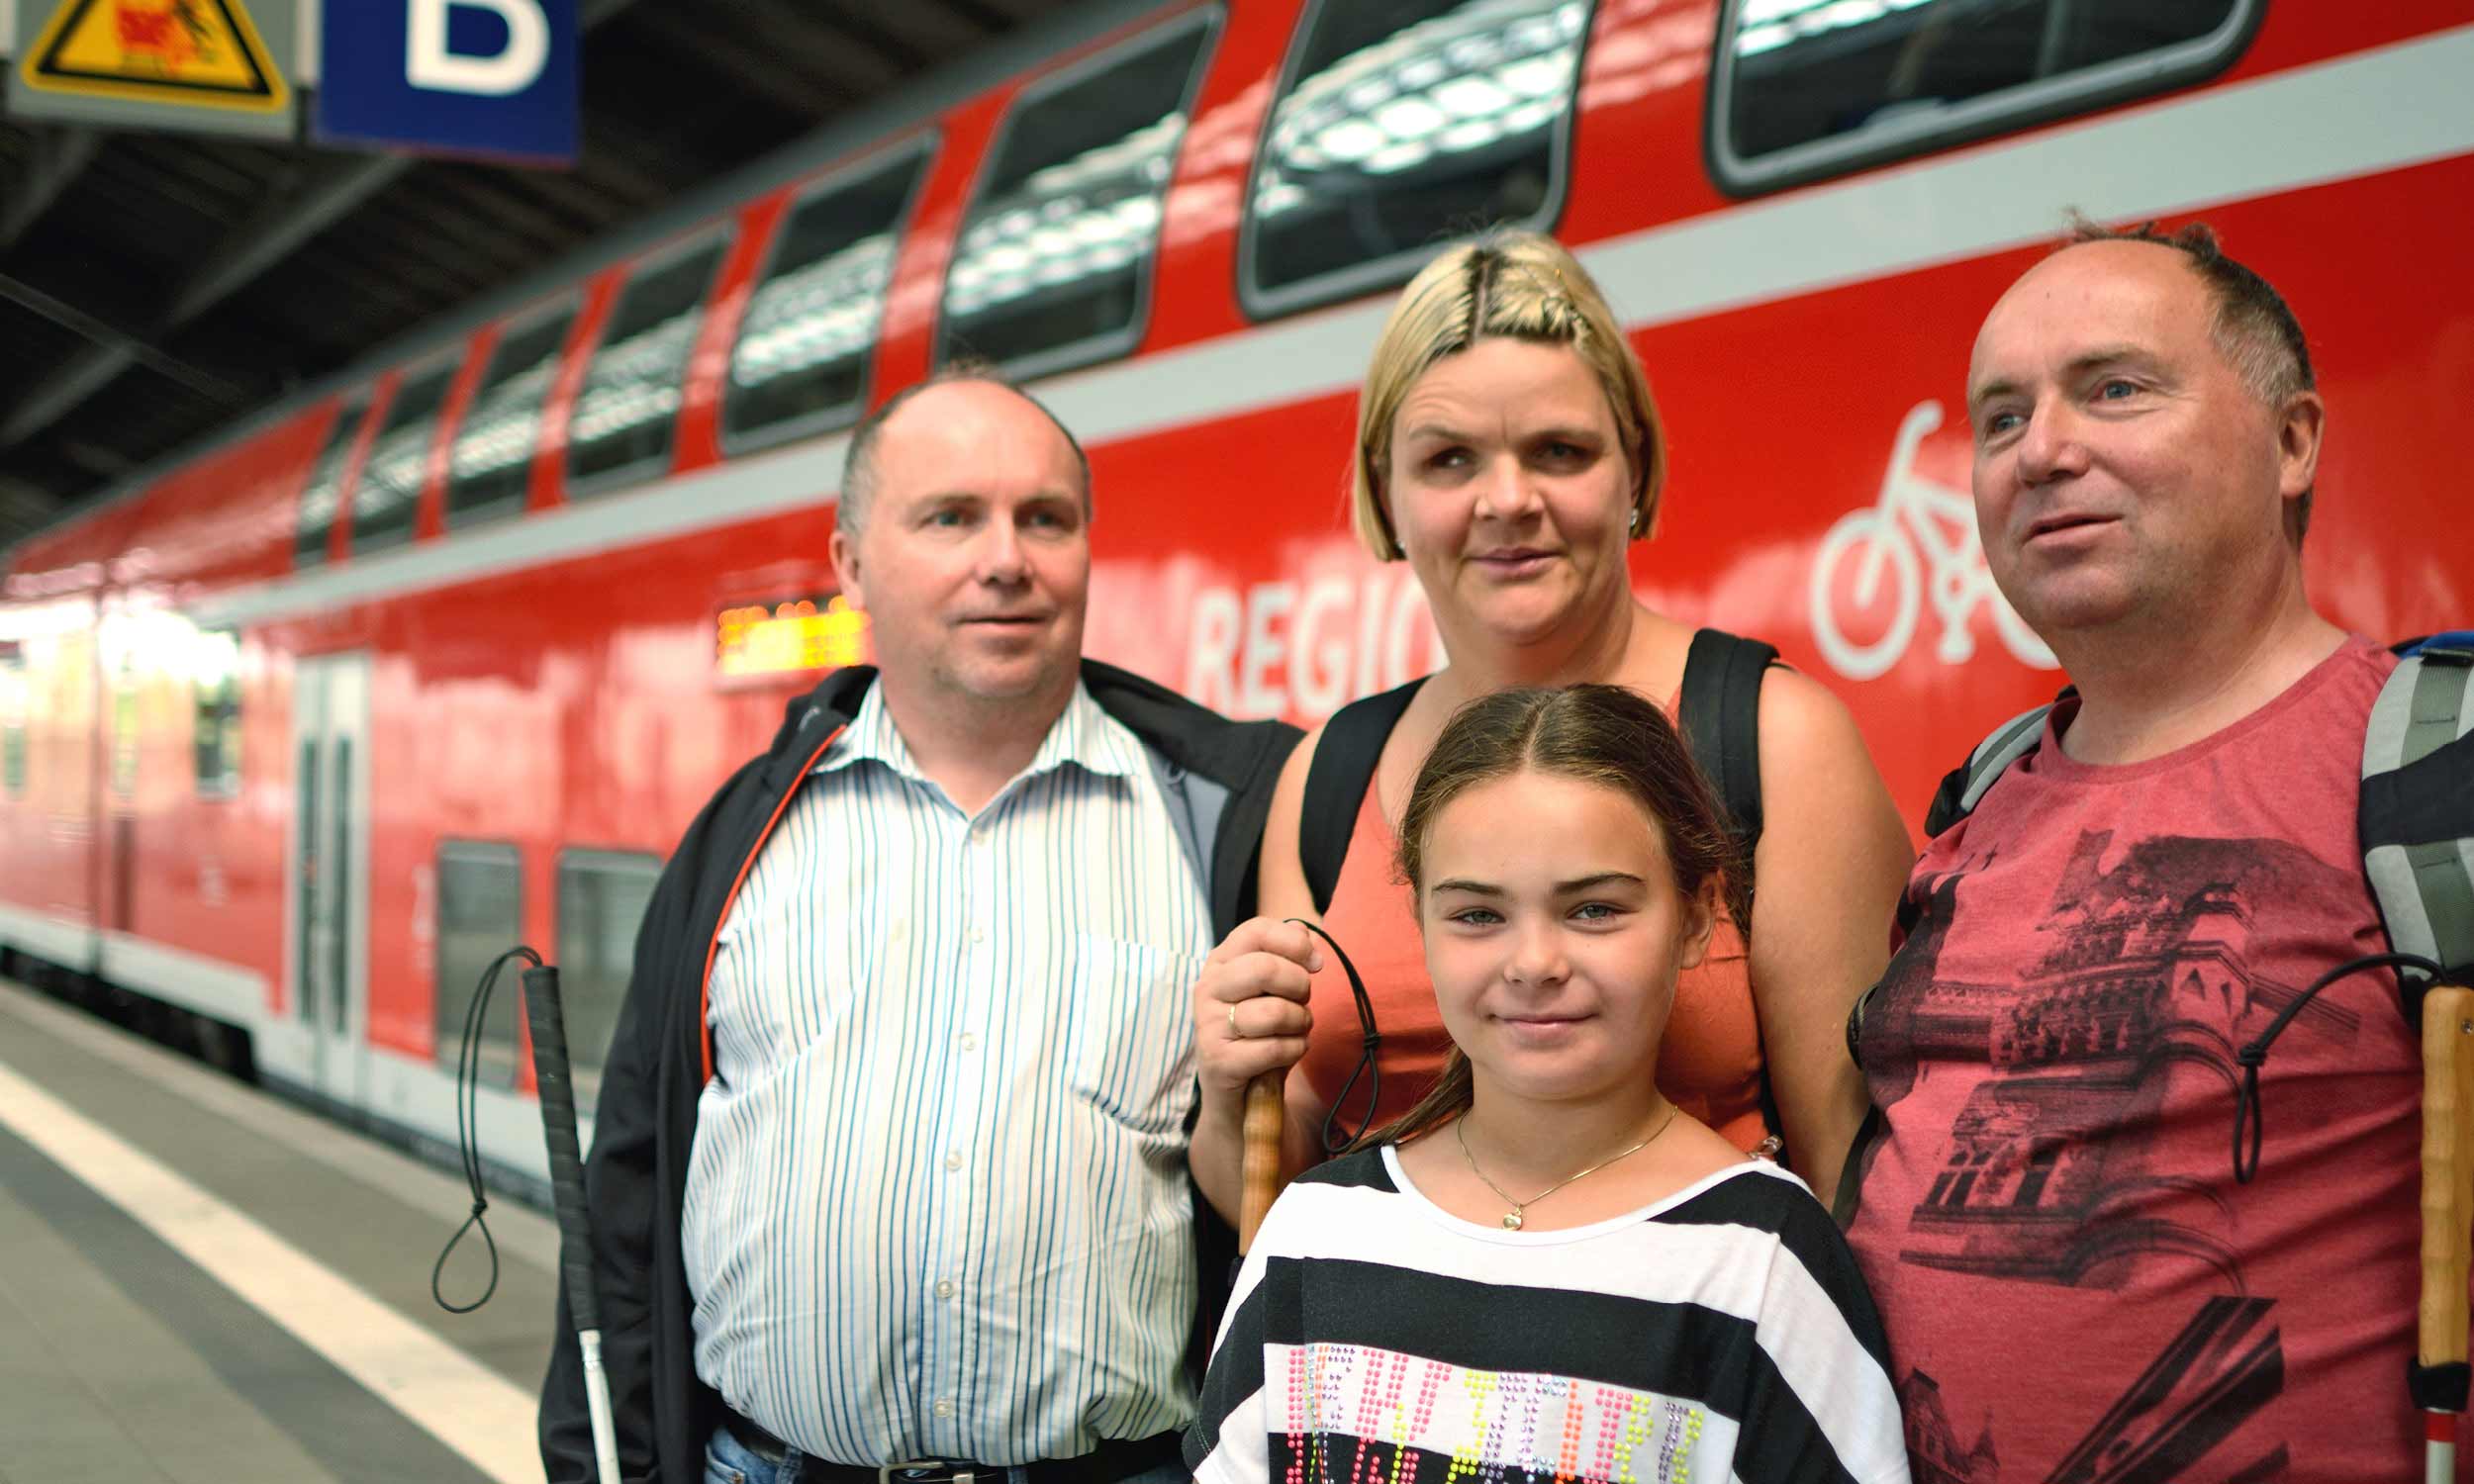 Group photo of tourists in Berlin - two adult blind brothers and a blind wife with a sighted daughter. They are standing on the platform in front of a red double-decker regional express.